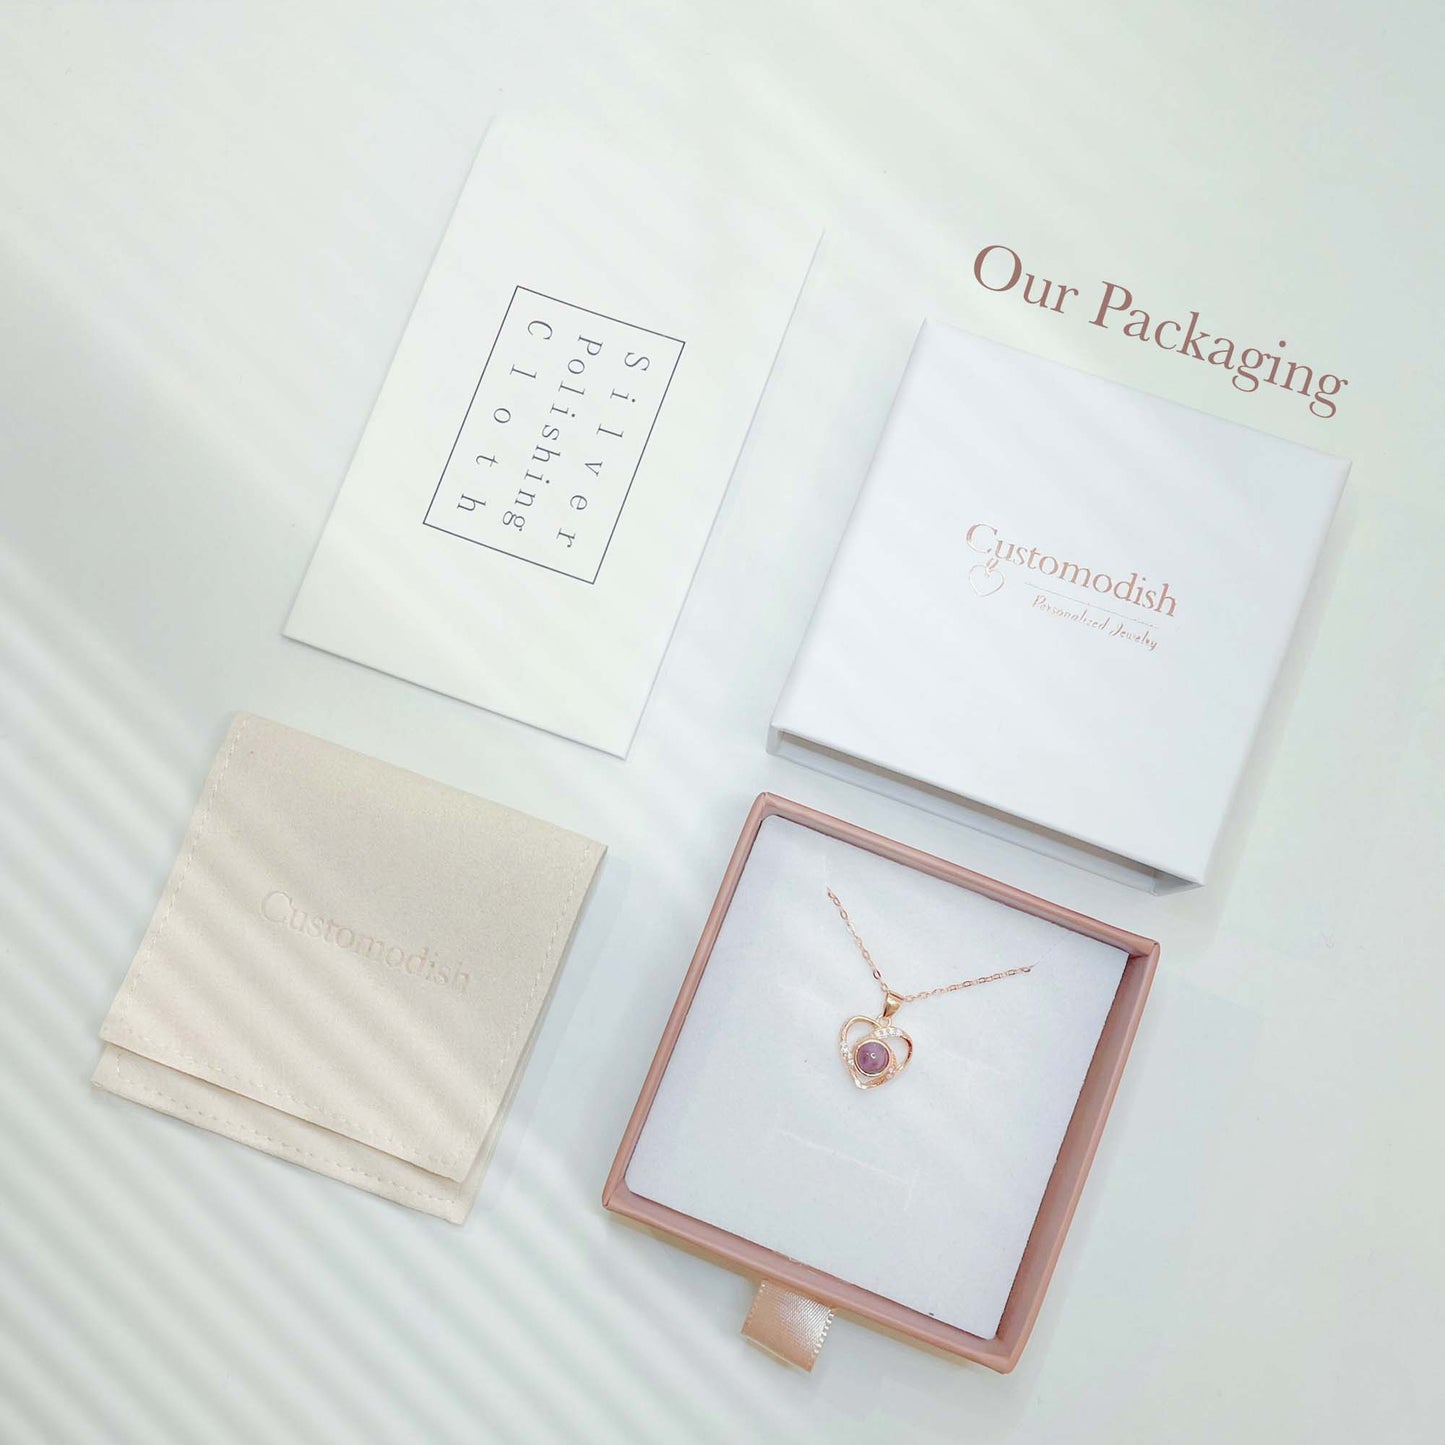 All Customodish projection jewelry come with free gift packaging.